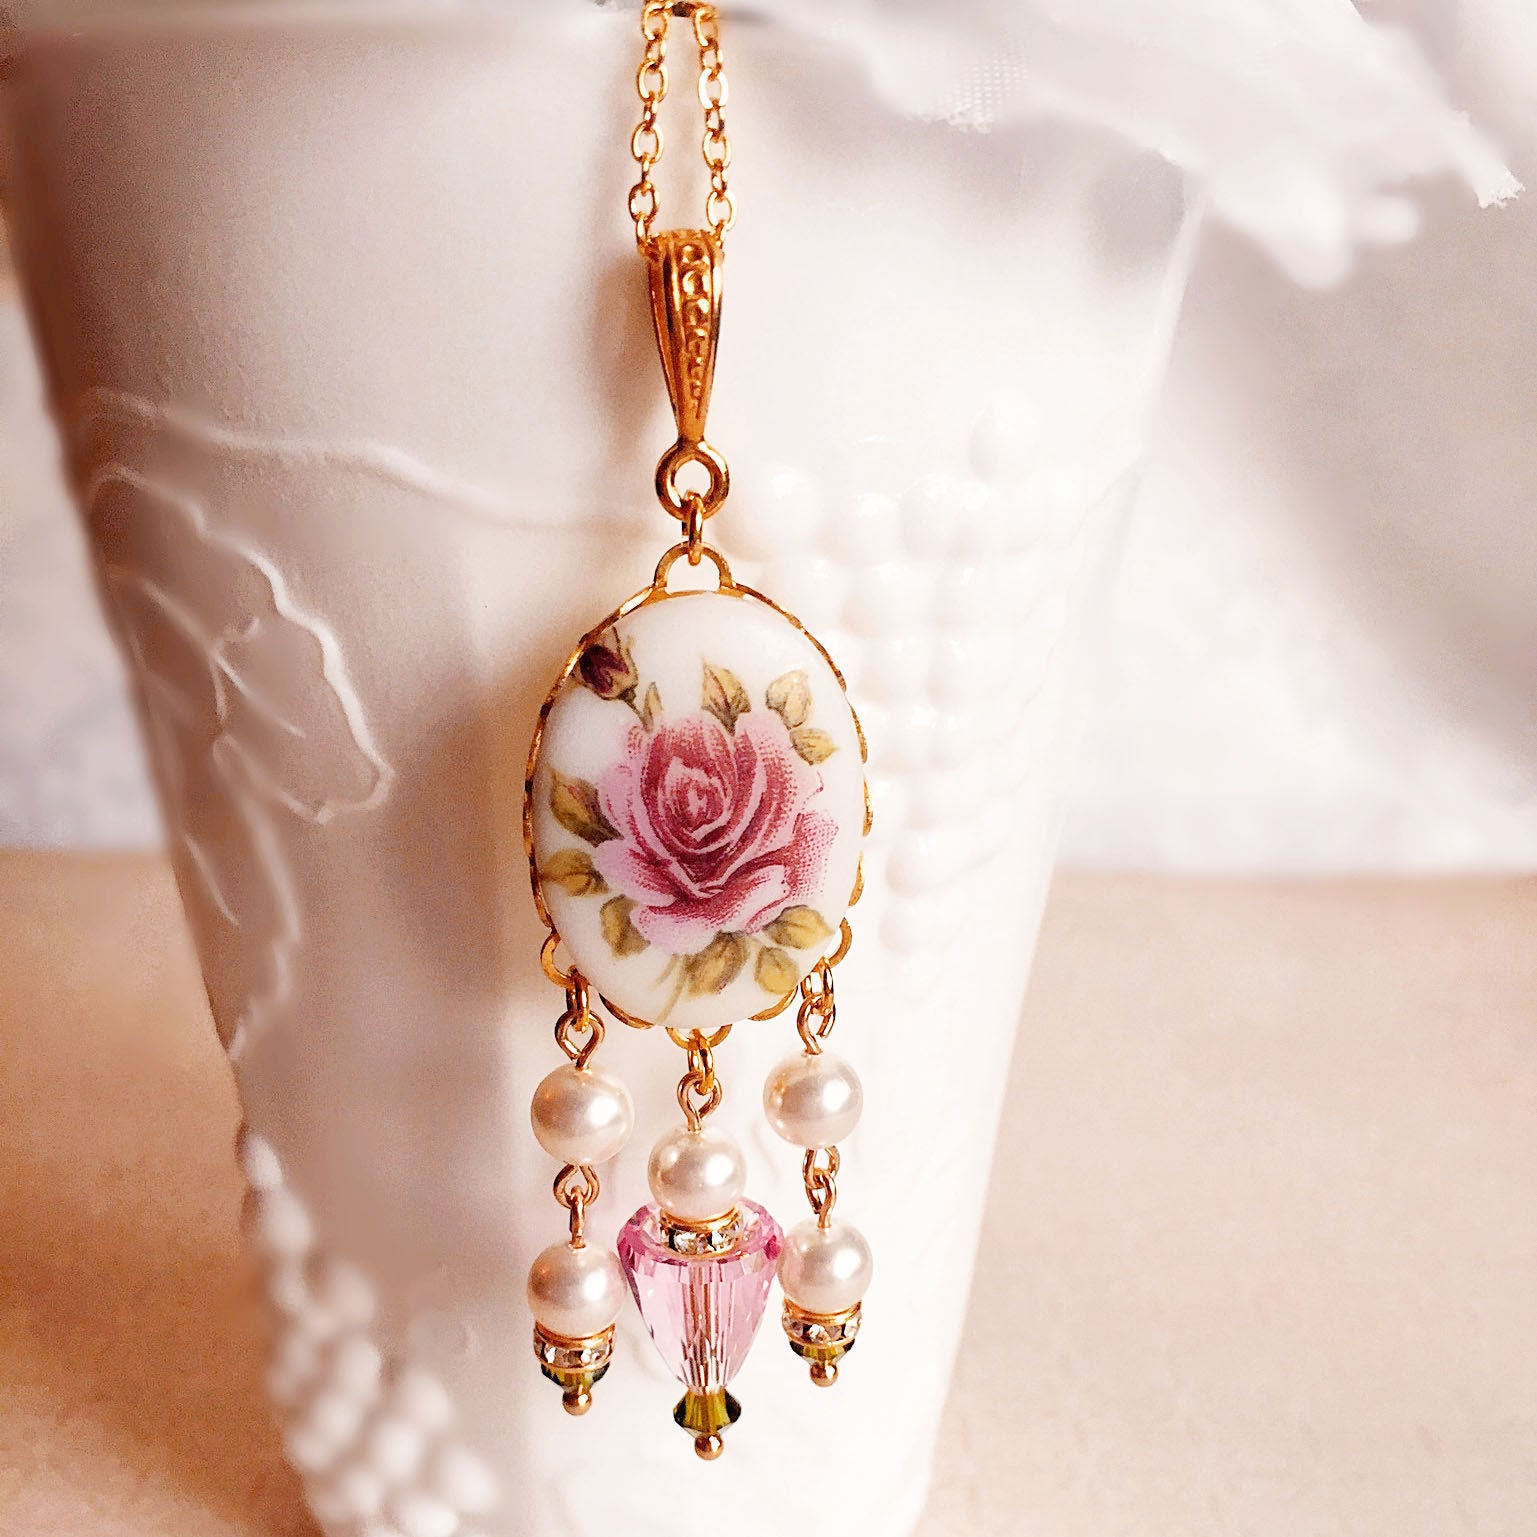 Best Mother's Day Gift - Rose - Victorian Jewelry - Cameo Pendant - TUDOR Rose